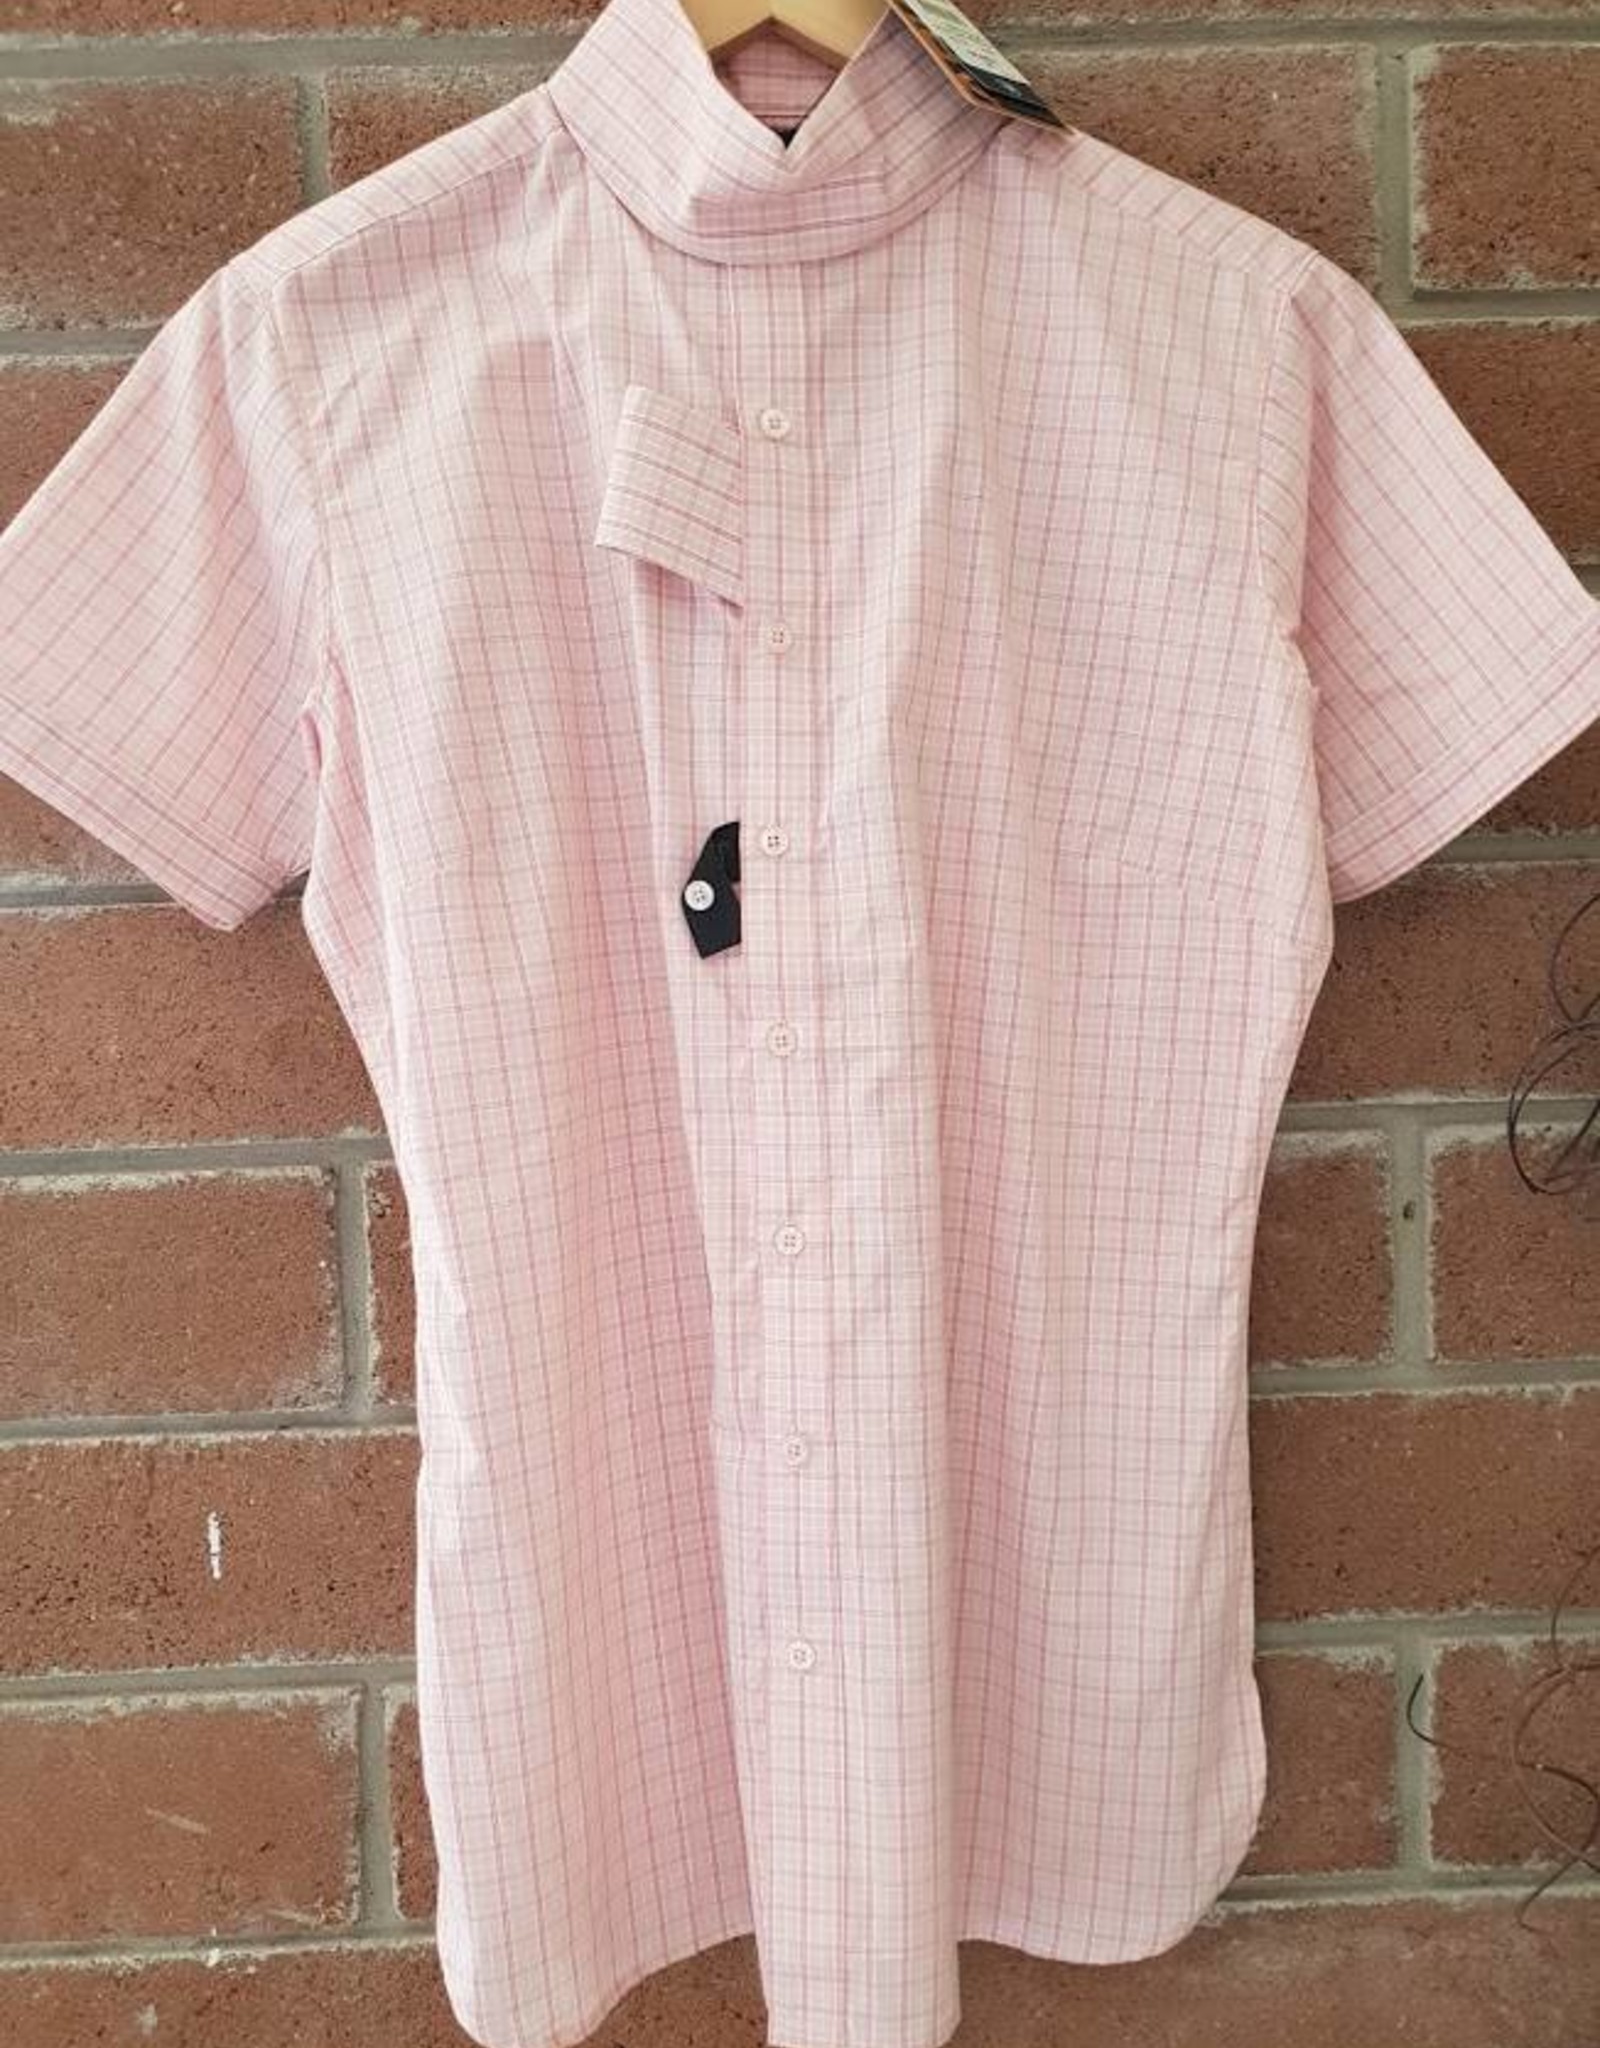 Ariat Ariat Victory Short Sleeve Show Shirt - Pink/White - Size 40